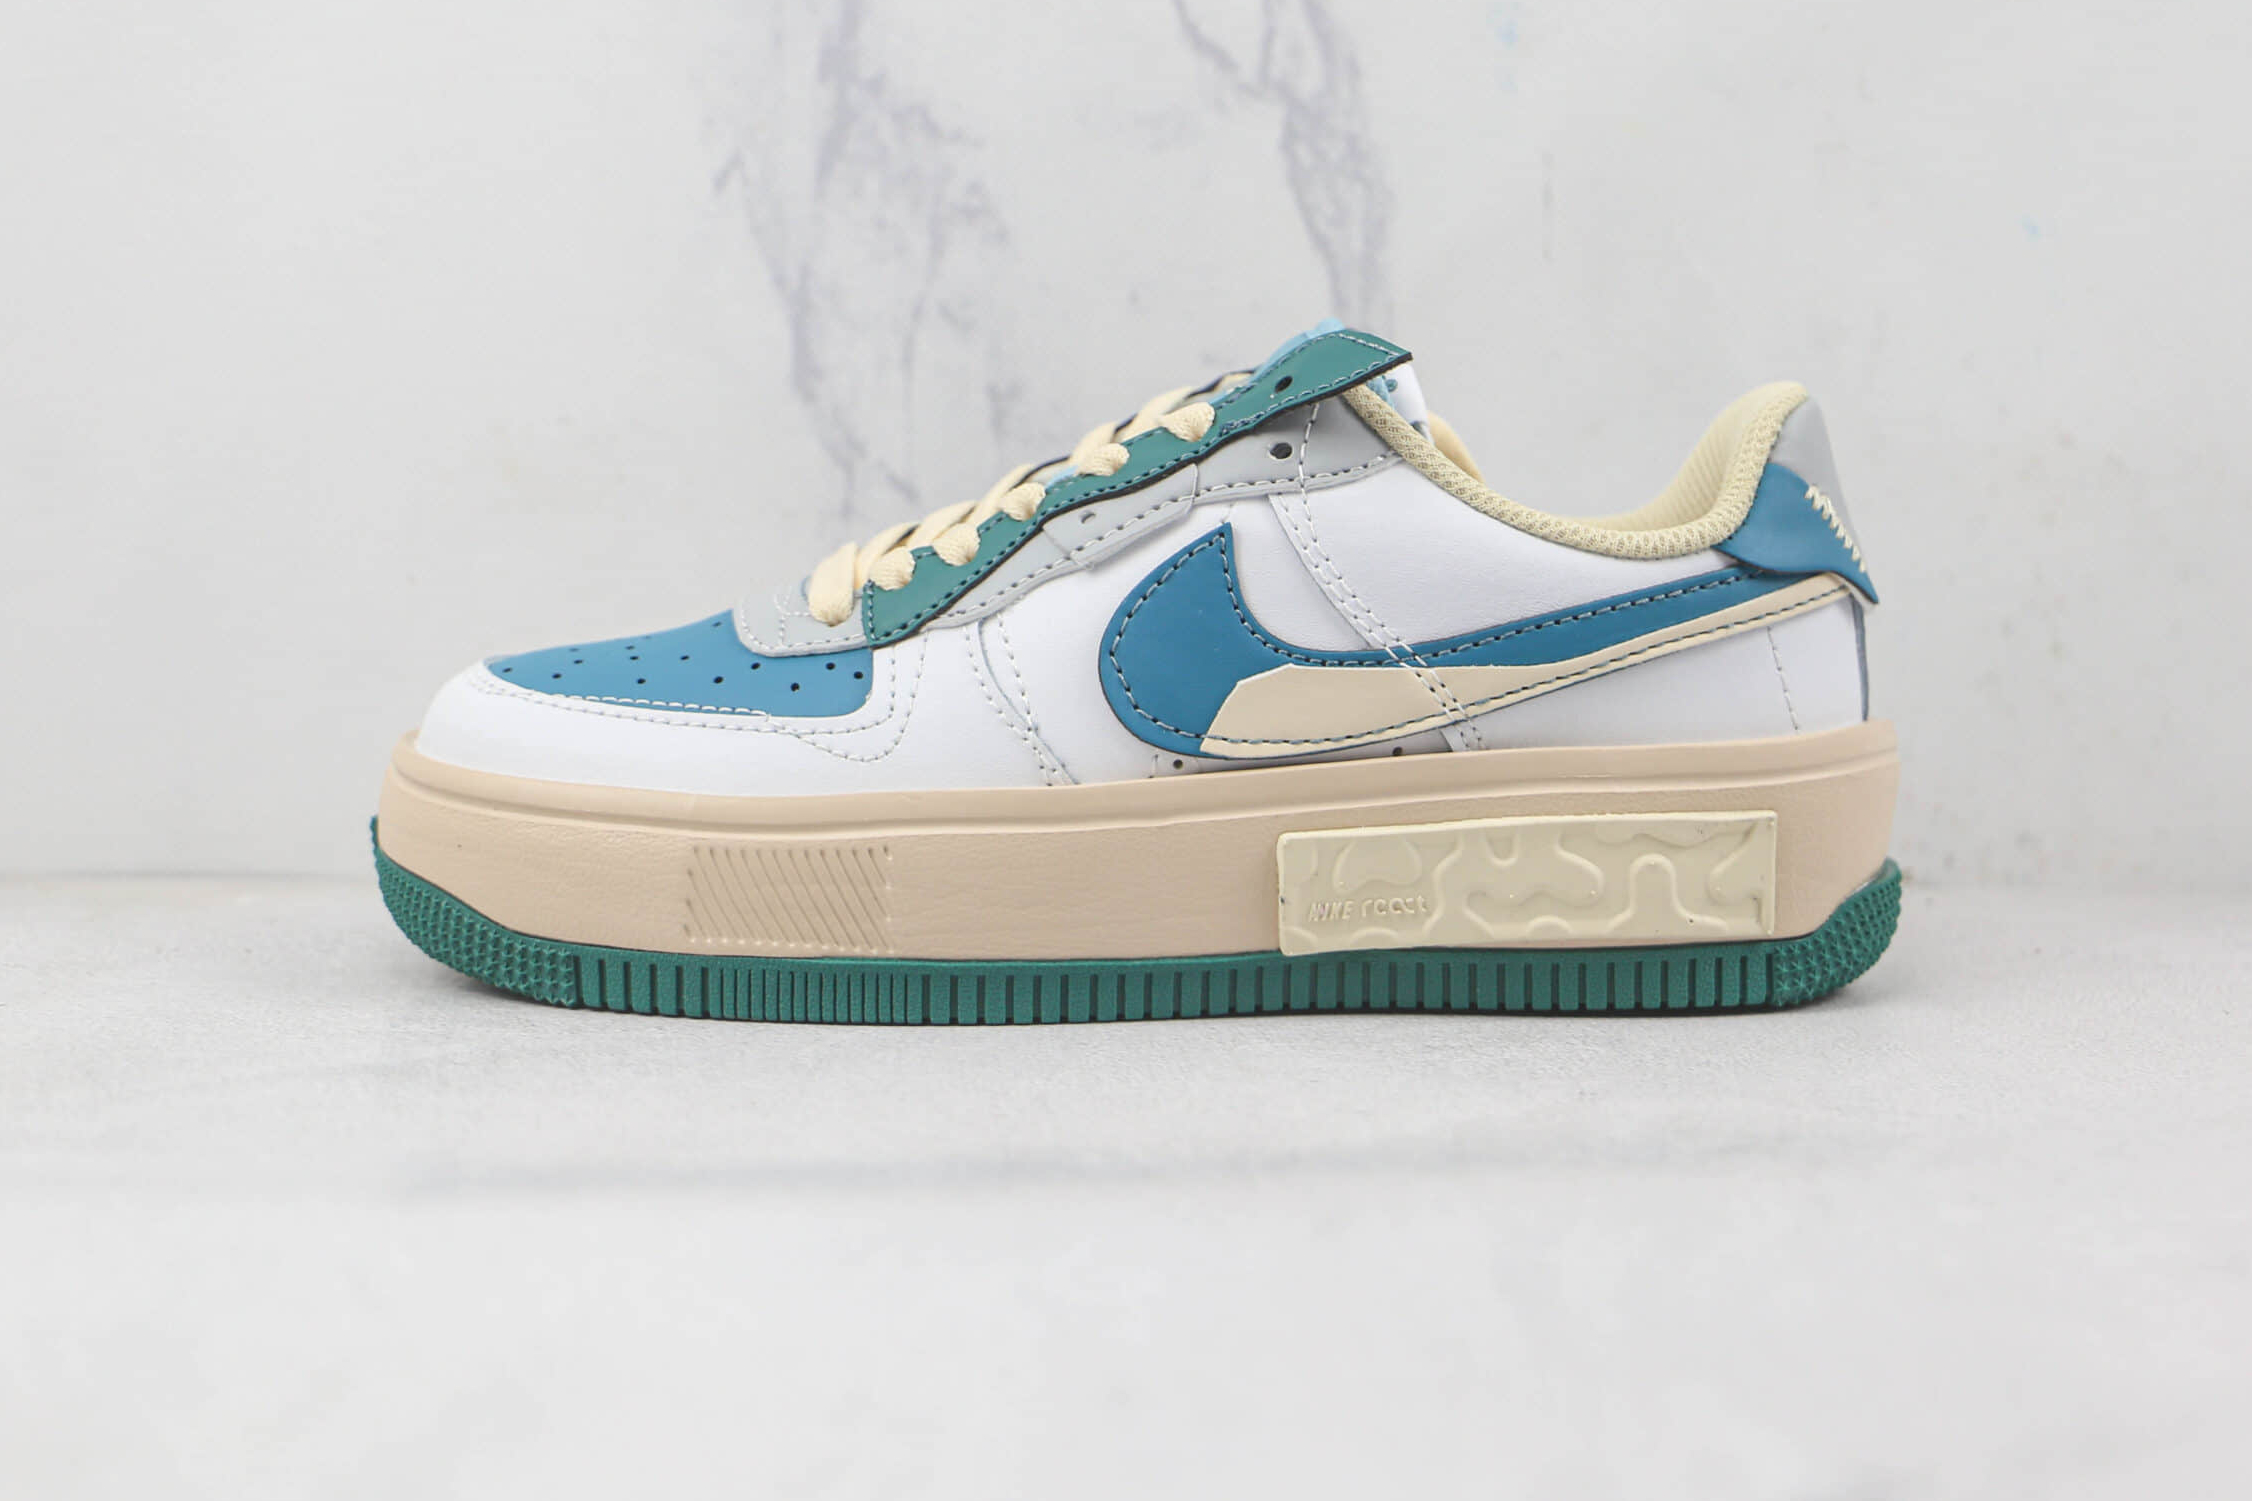 Nike Air Force 1 Fontanka Navy Blue Green Grey CW6688-604 - Modern Style and Comfort